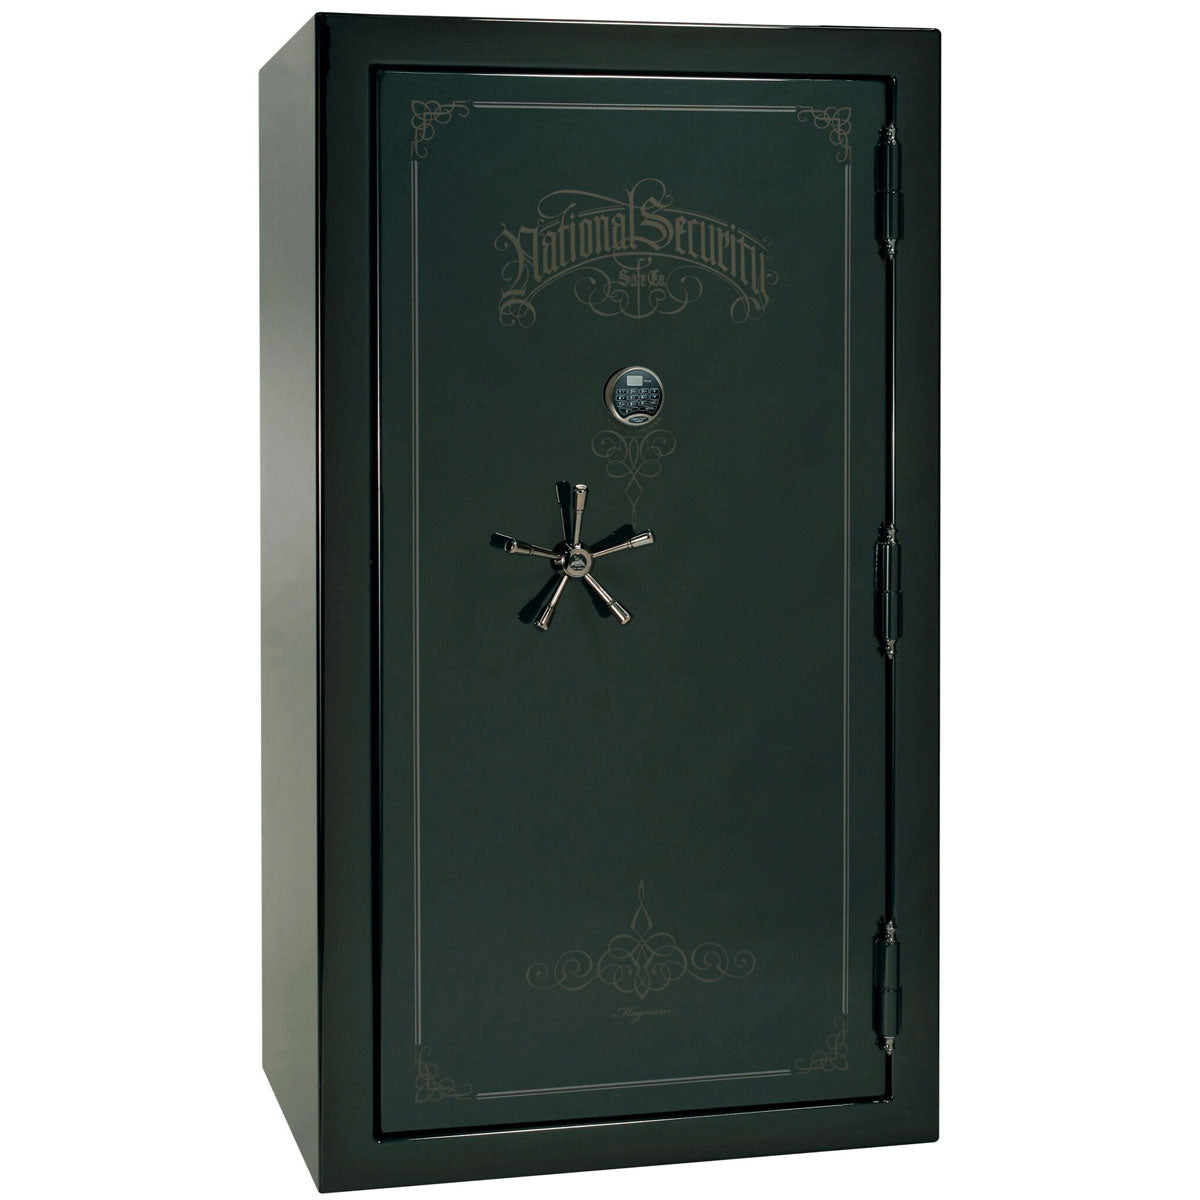 Liberty Safe Classic Plus 50 in Feathered Green Gloss with Black Chrome Electronic Lock, closed door.